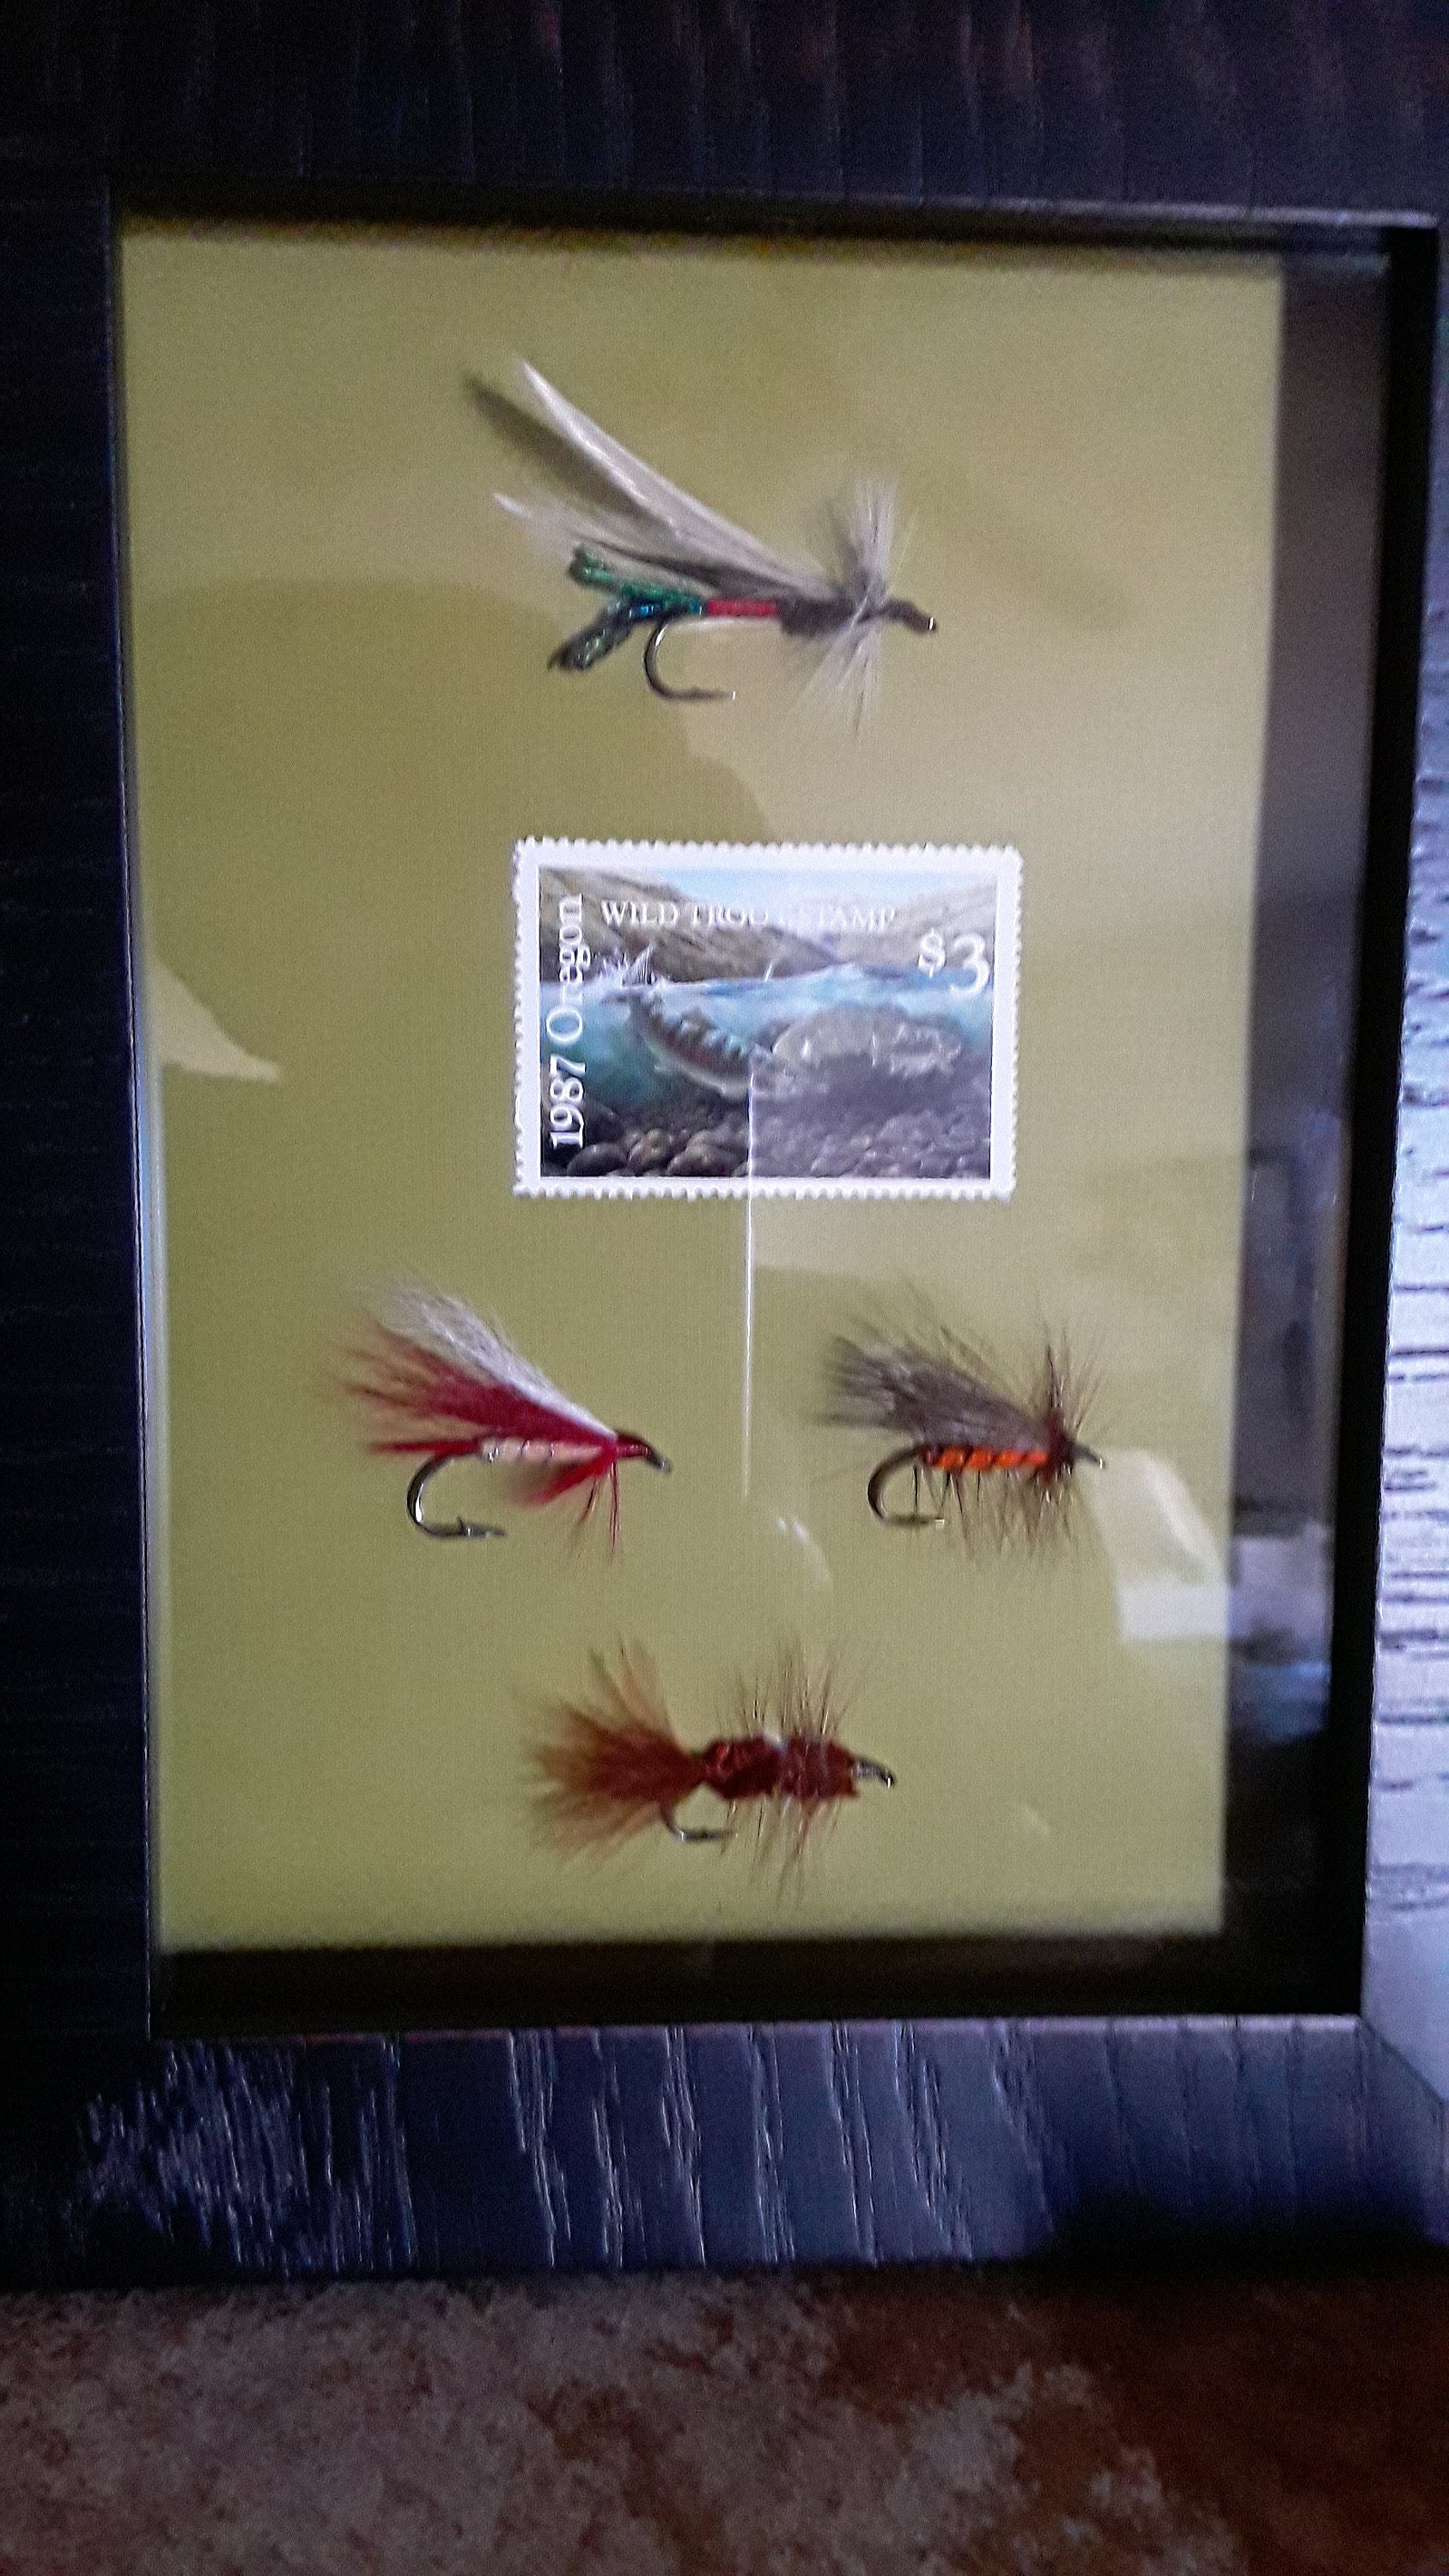 1987 Oregon Wild Trout Stamp, Fly Desk Display. Fly Fishing, Fly